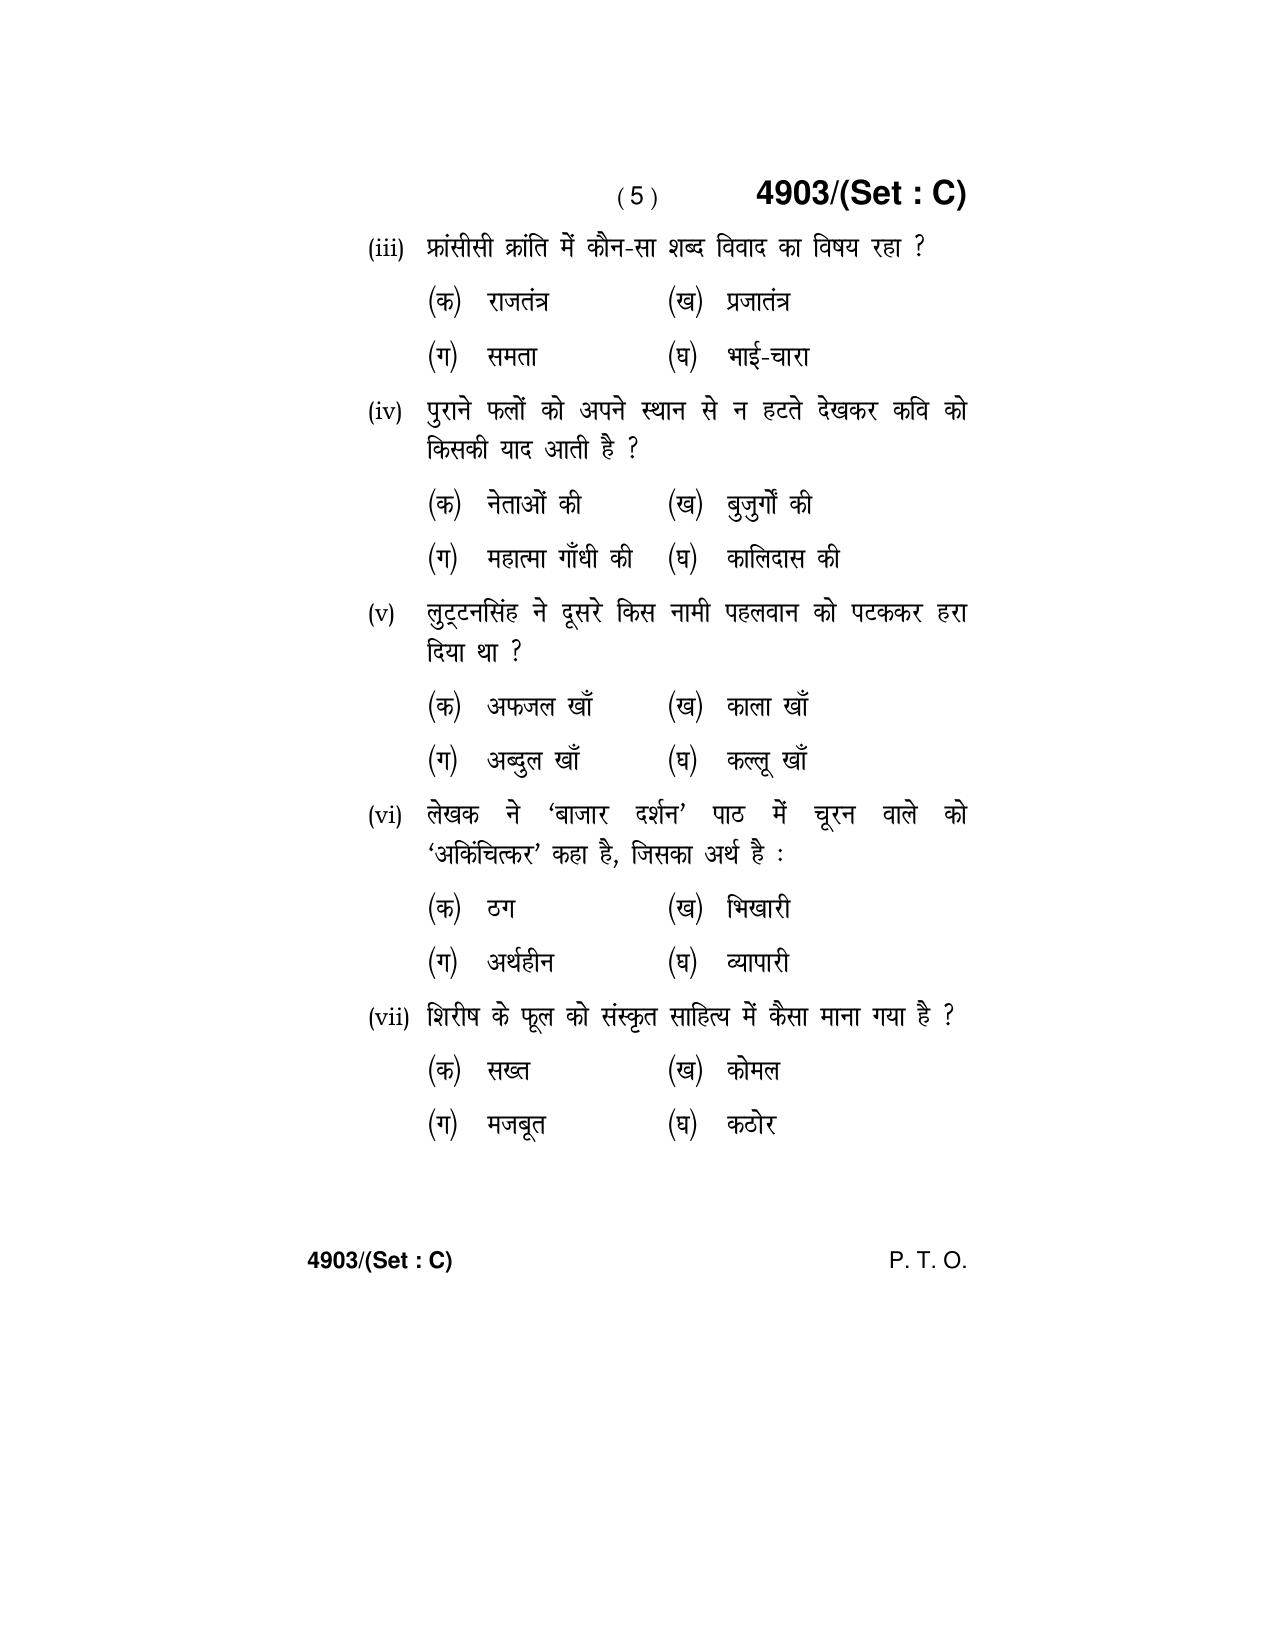 Haryana Board HBSE Class 12 Hindi Core 2020 Question Paper - Page 21